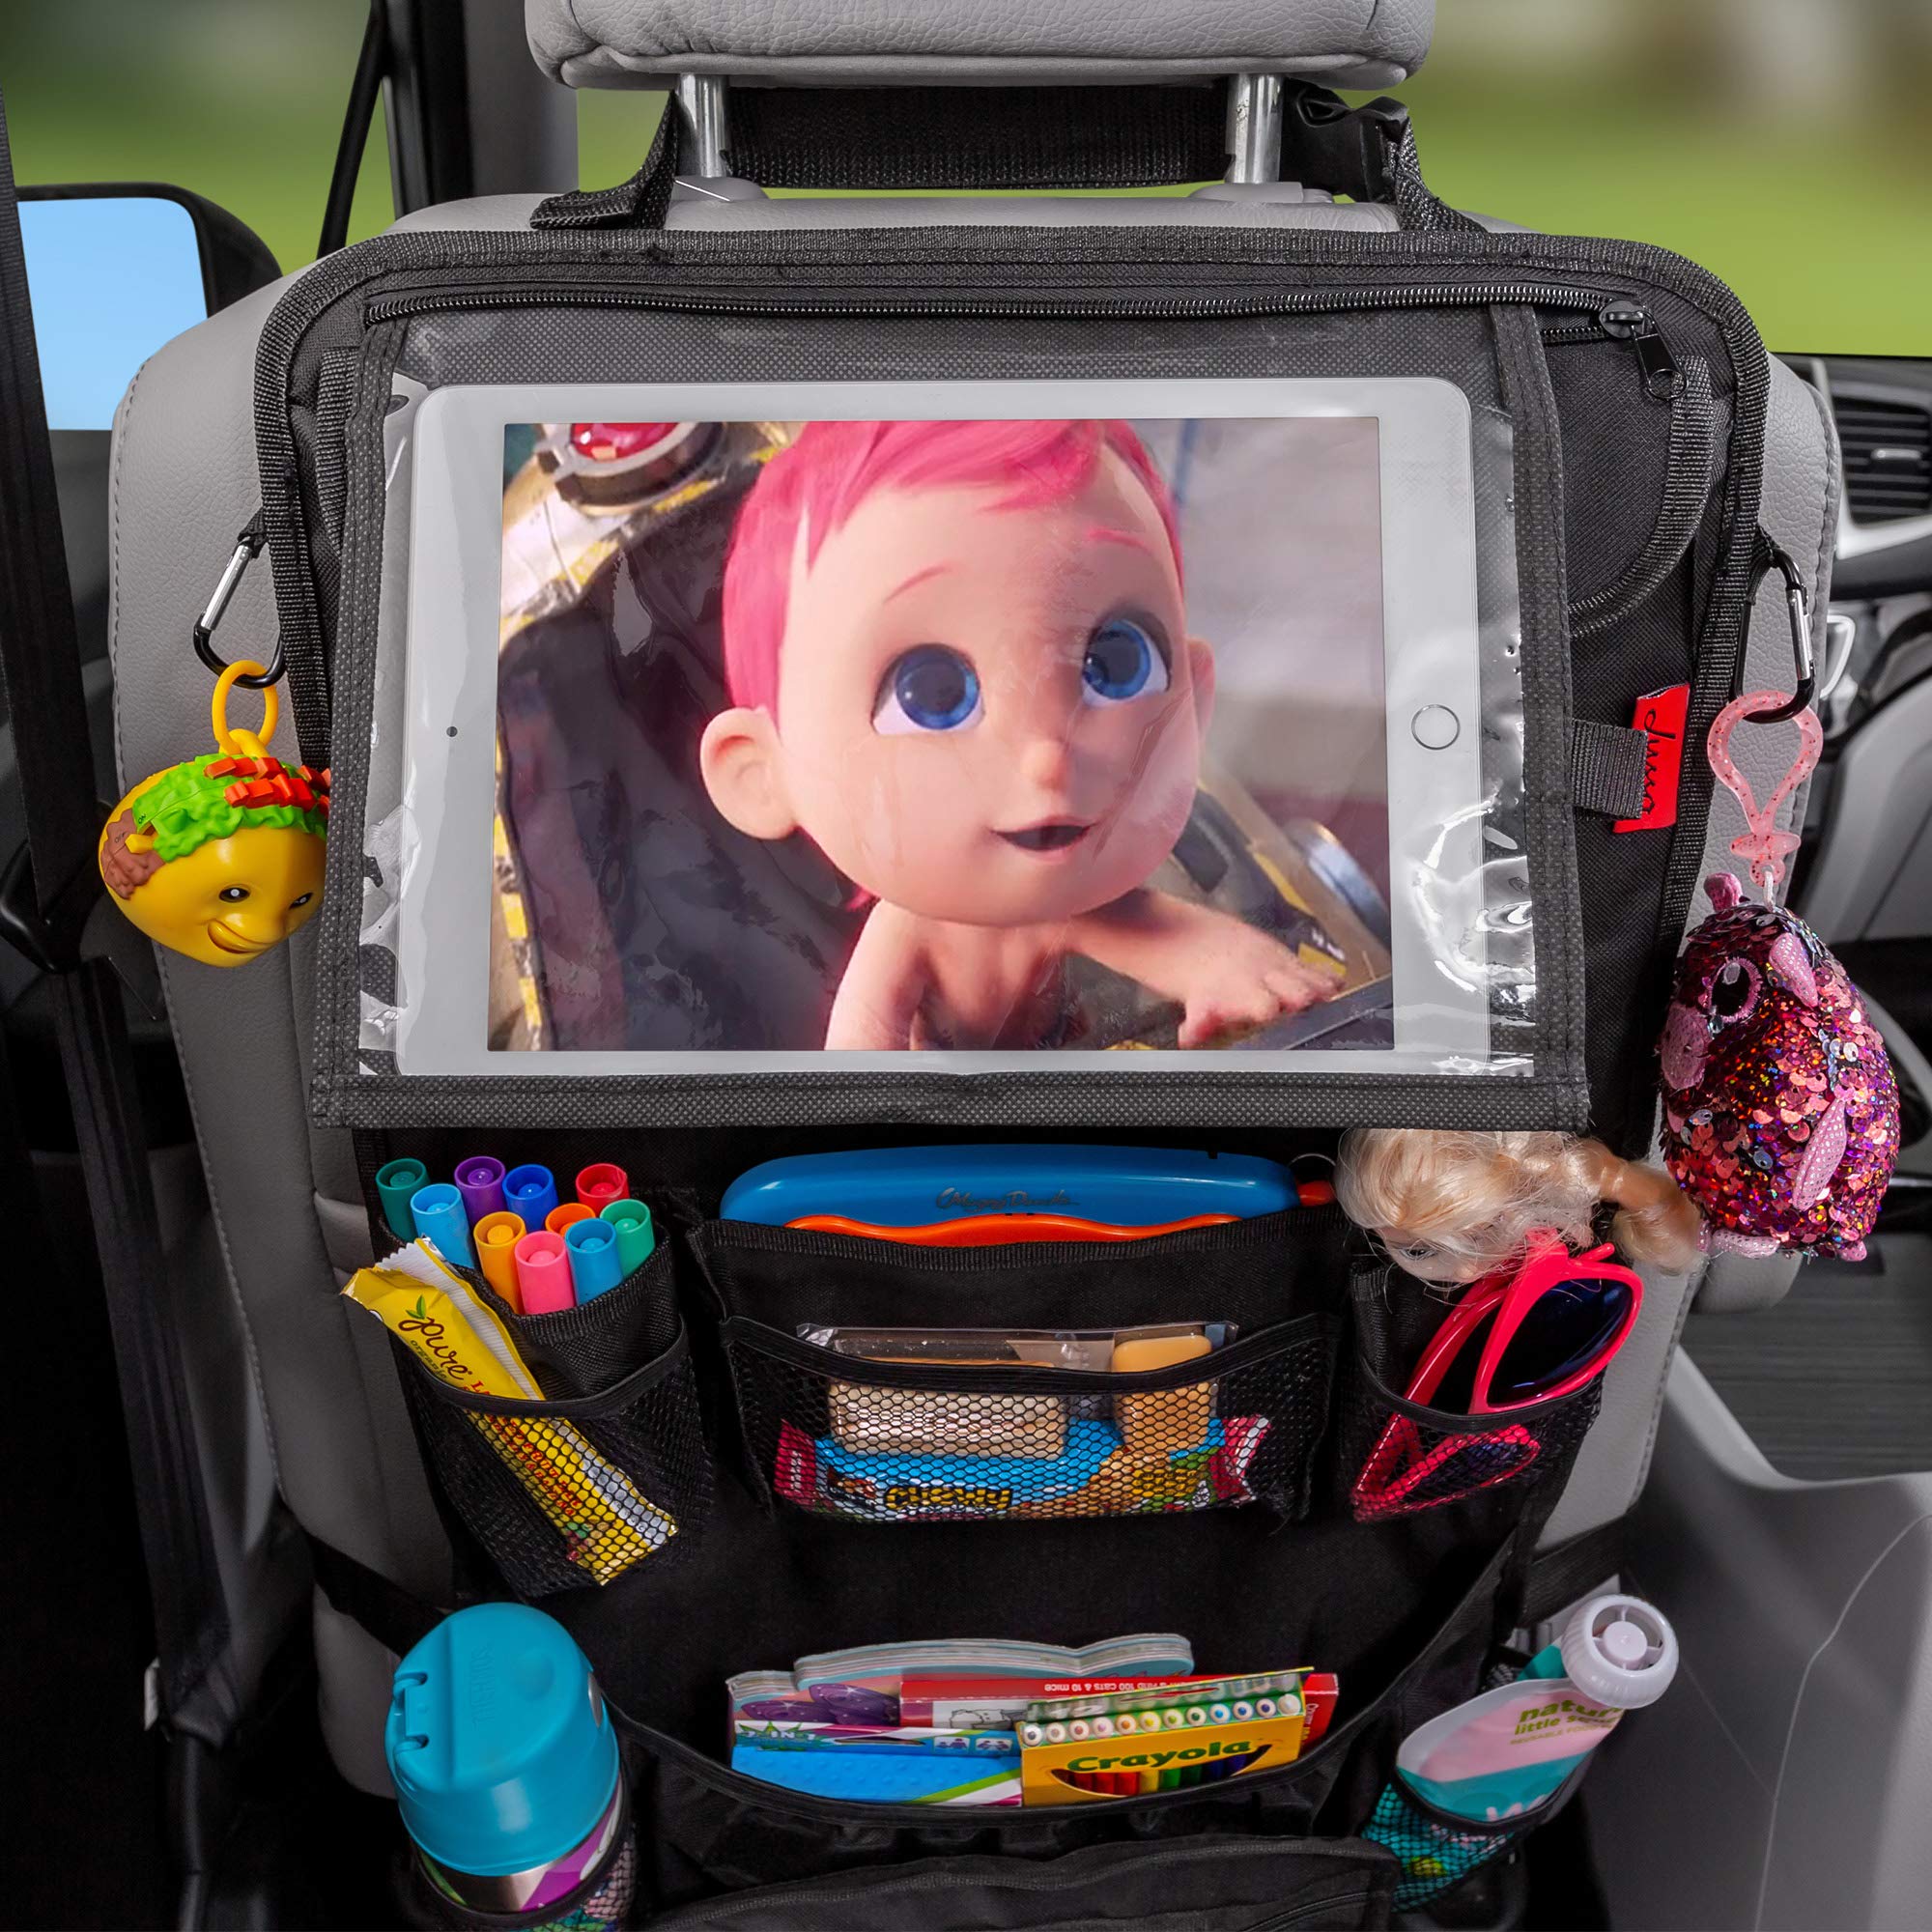 Lusso Gear Kids Travel Tray (Black) + Heavy Duty Car Seat Organizer (Black), Extra Large for Protection, Sag Proof & Reinforced Corners, Protects iPad & Backseat, 12 Versatile Car Seat Organizer Stora